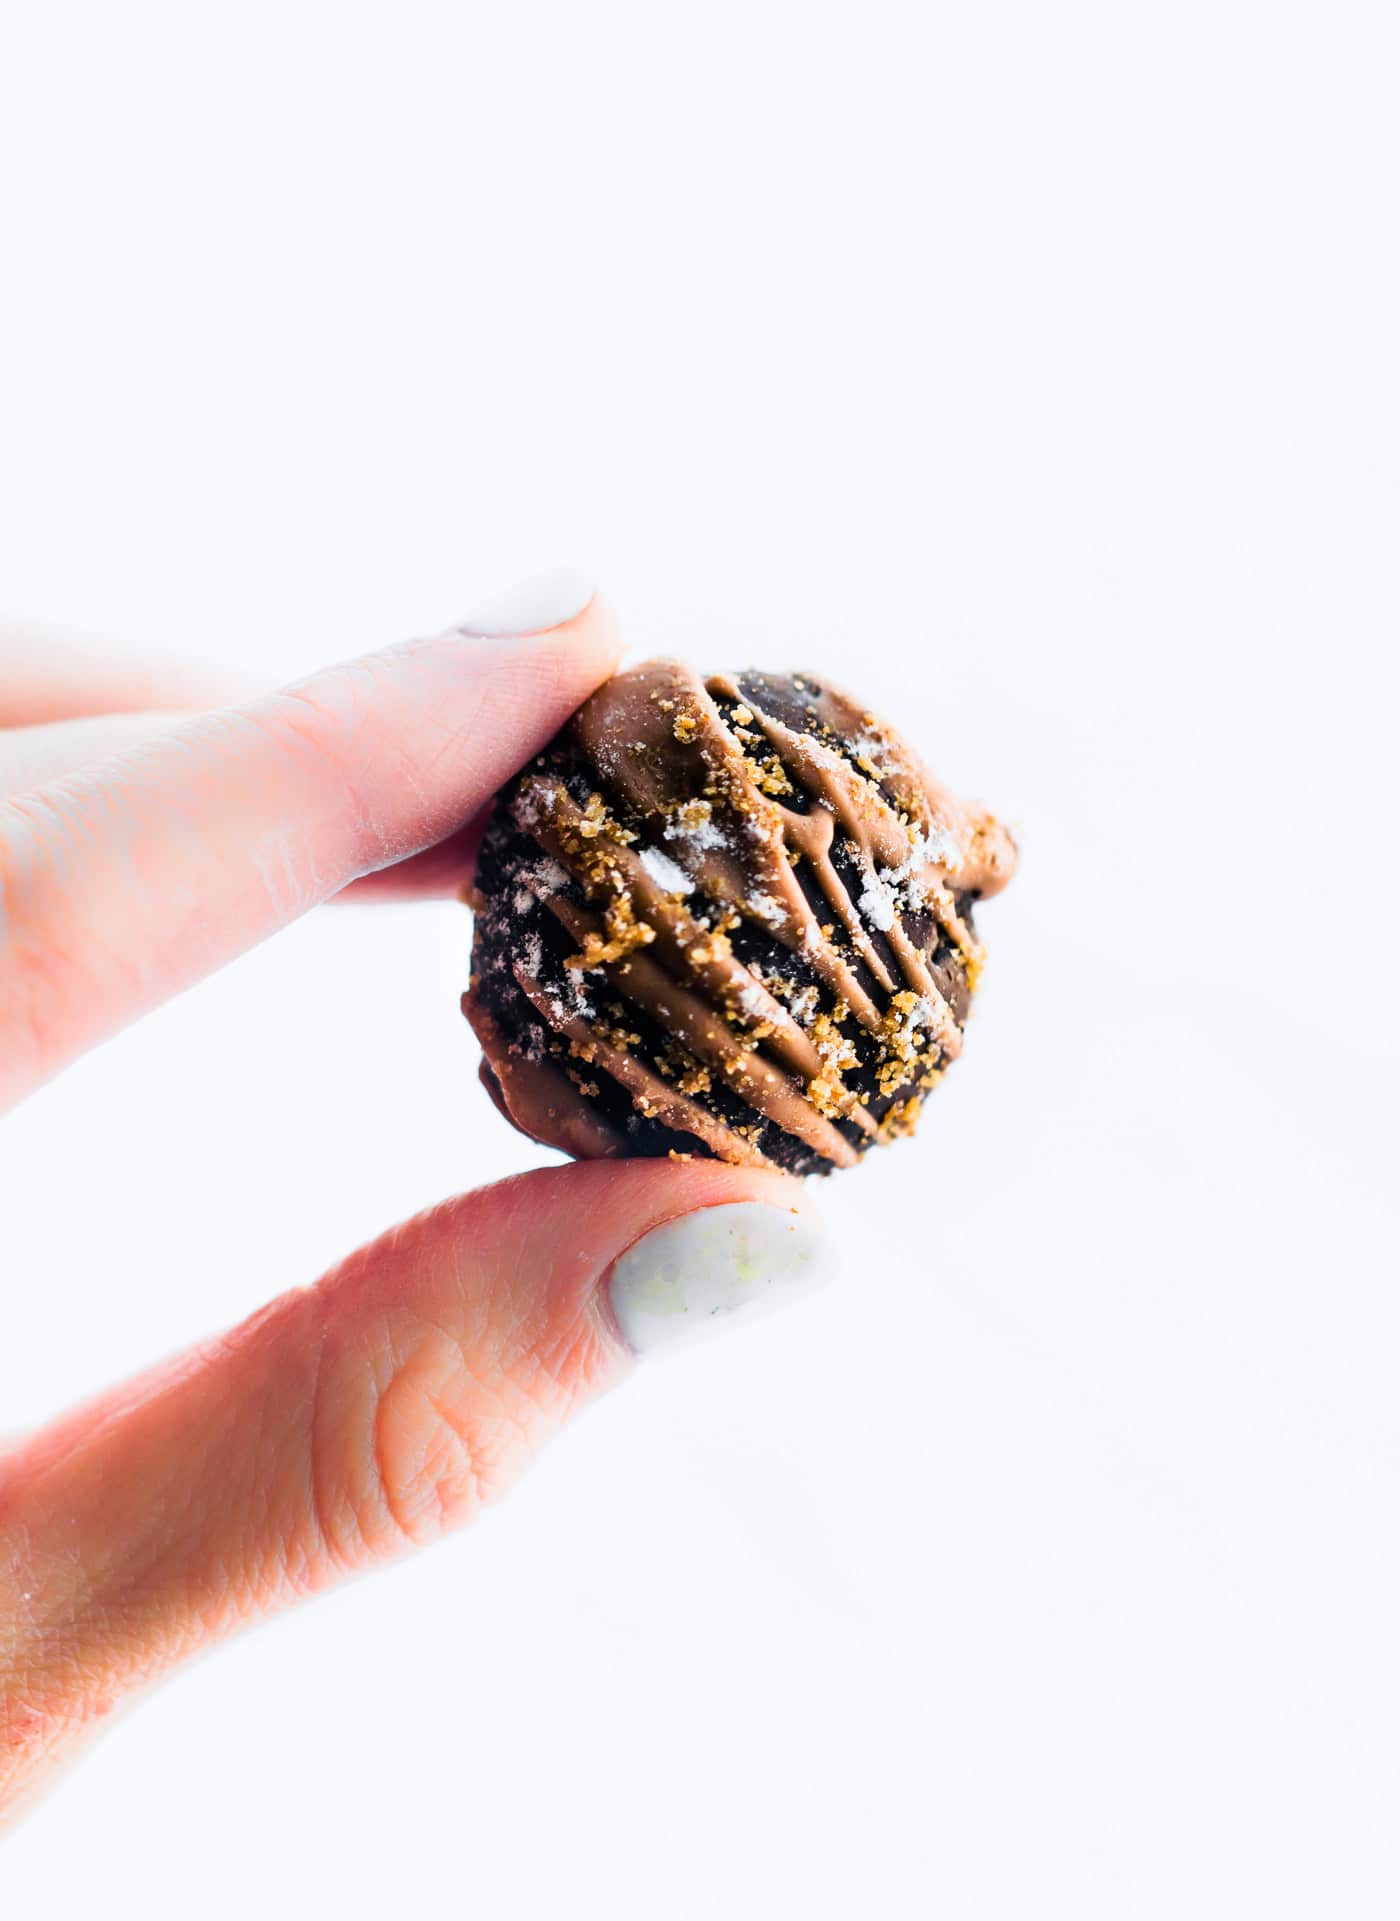 A single dark chocolate amaretto cake bite drizzled with almond butter and dark chocolate being held between thumb and forefinger.